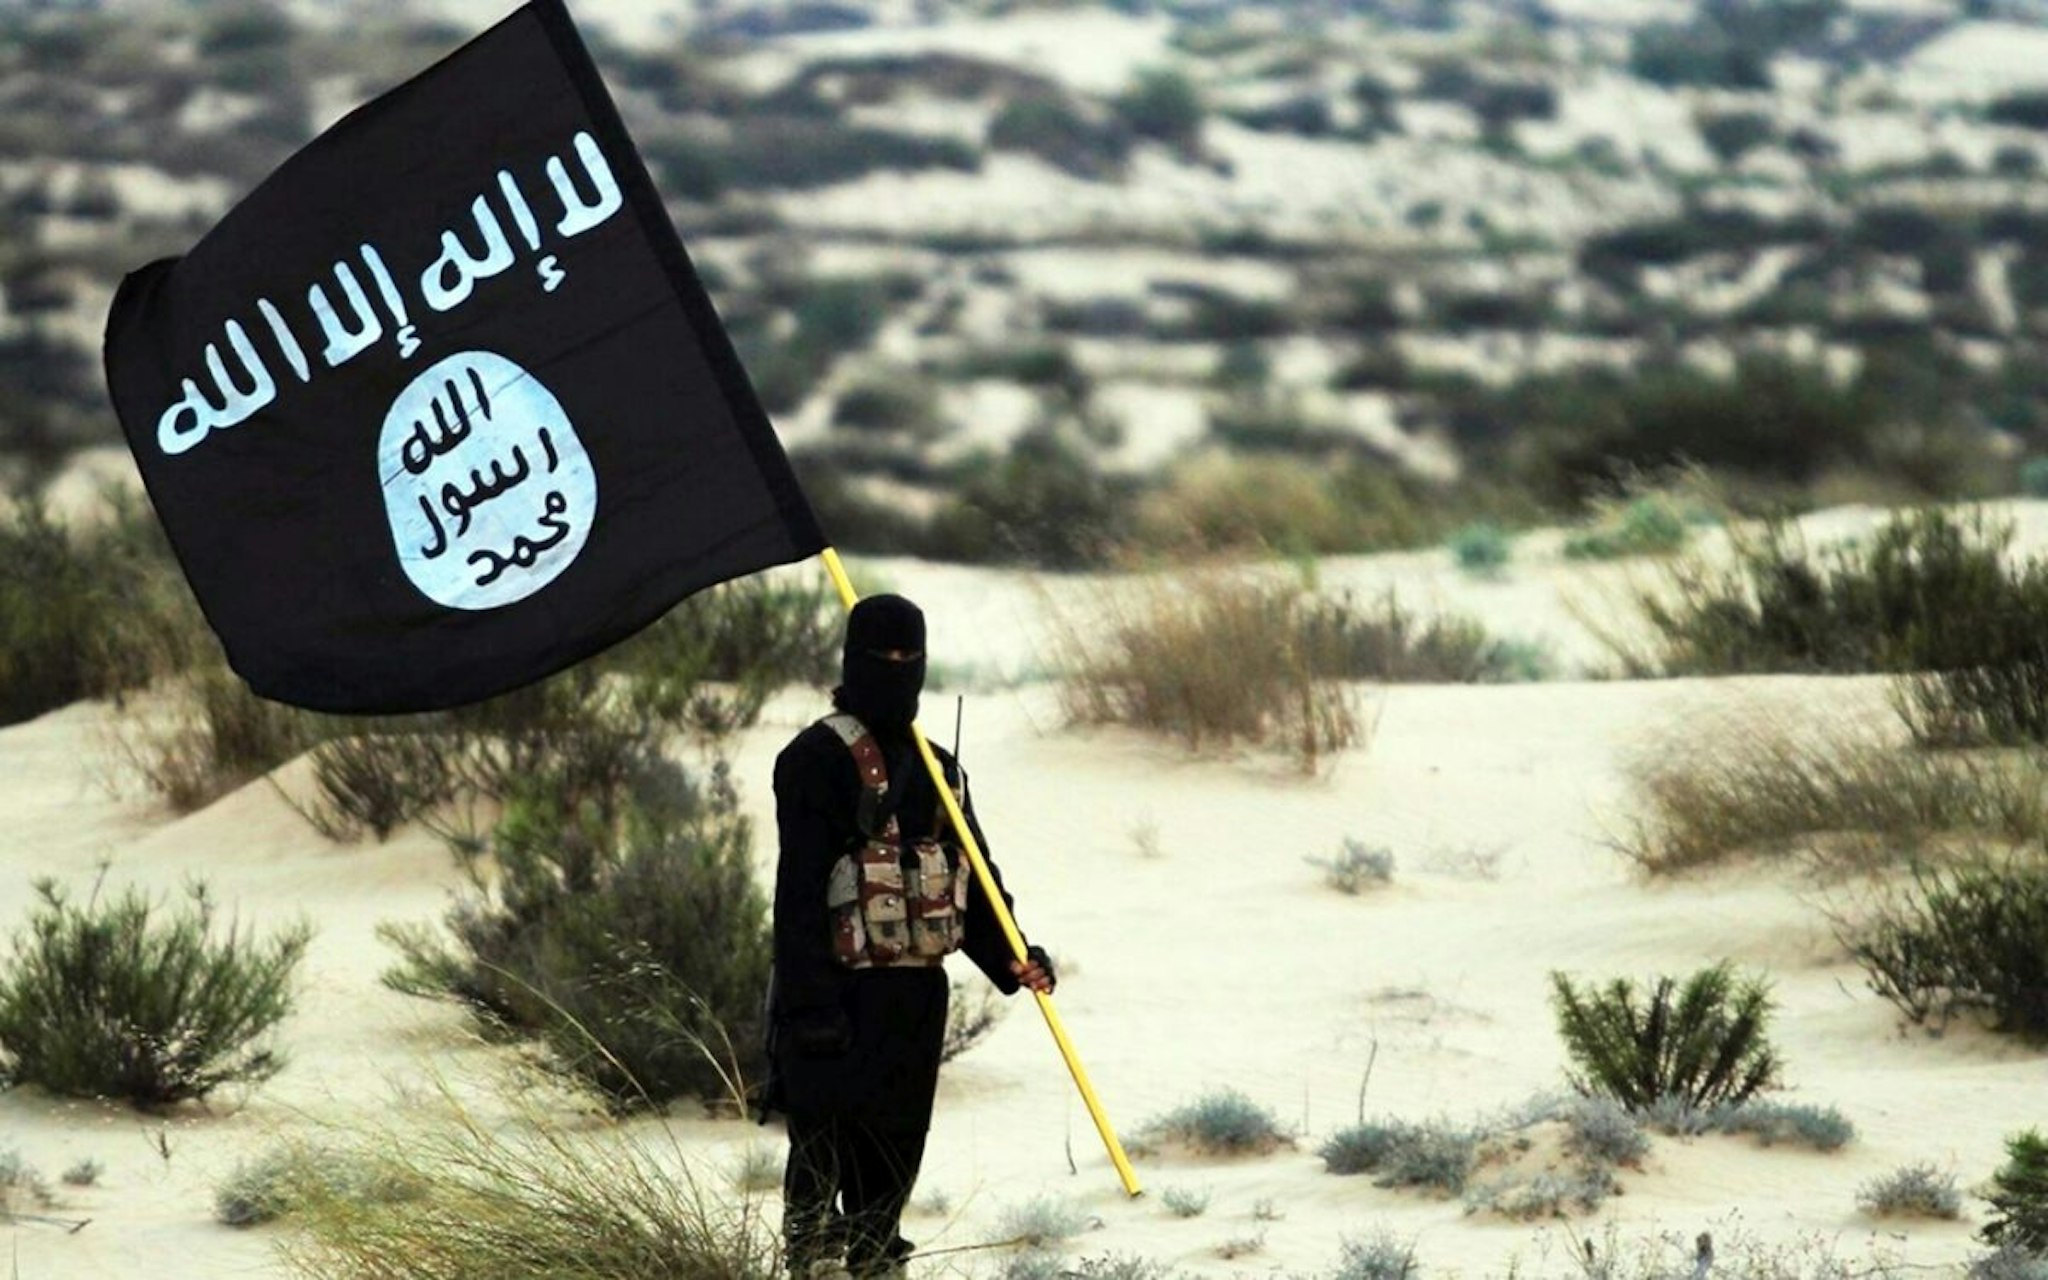 Islamic State/Iraq/Syria: A masked Islamic State soldier poses holding the ISIL banner somewhere in the deserts of Iraq or Syria